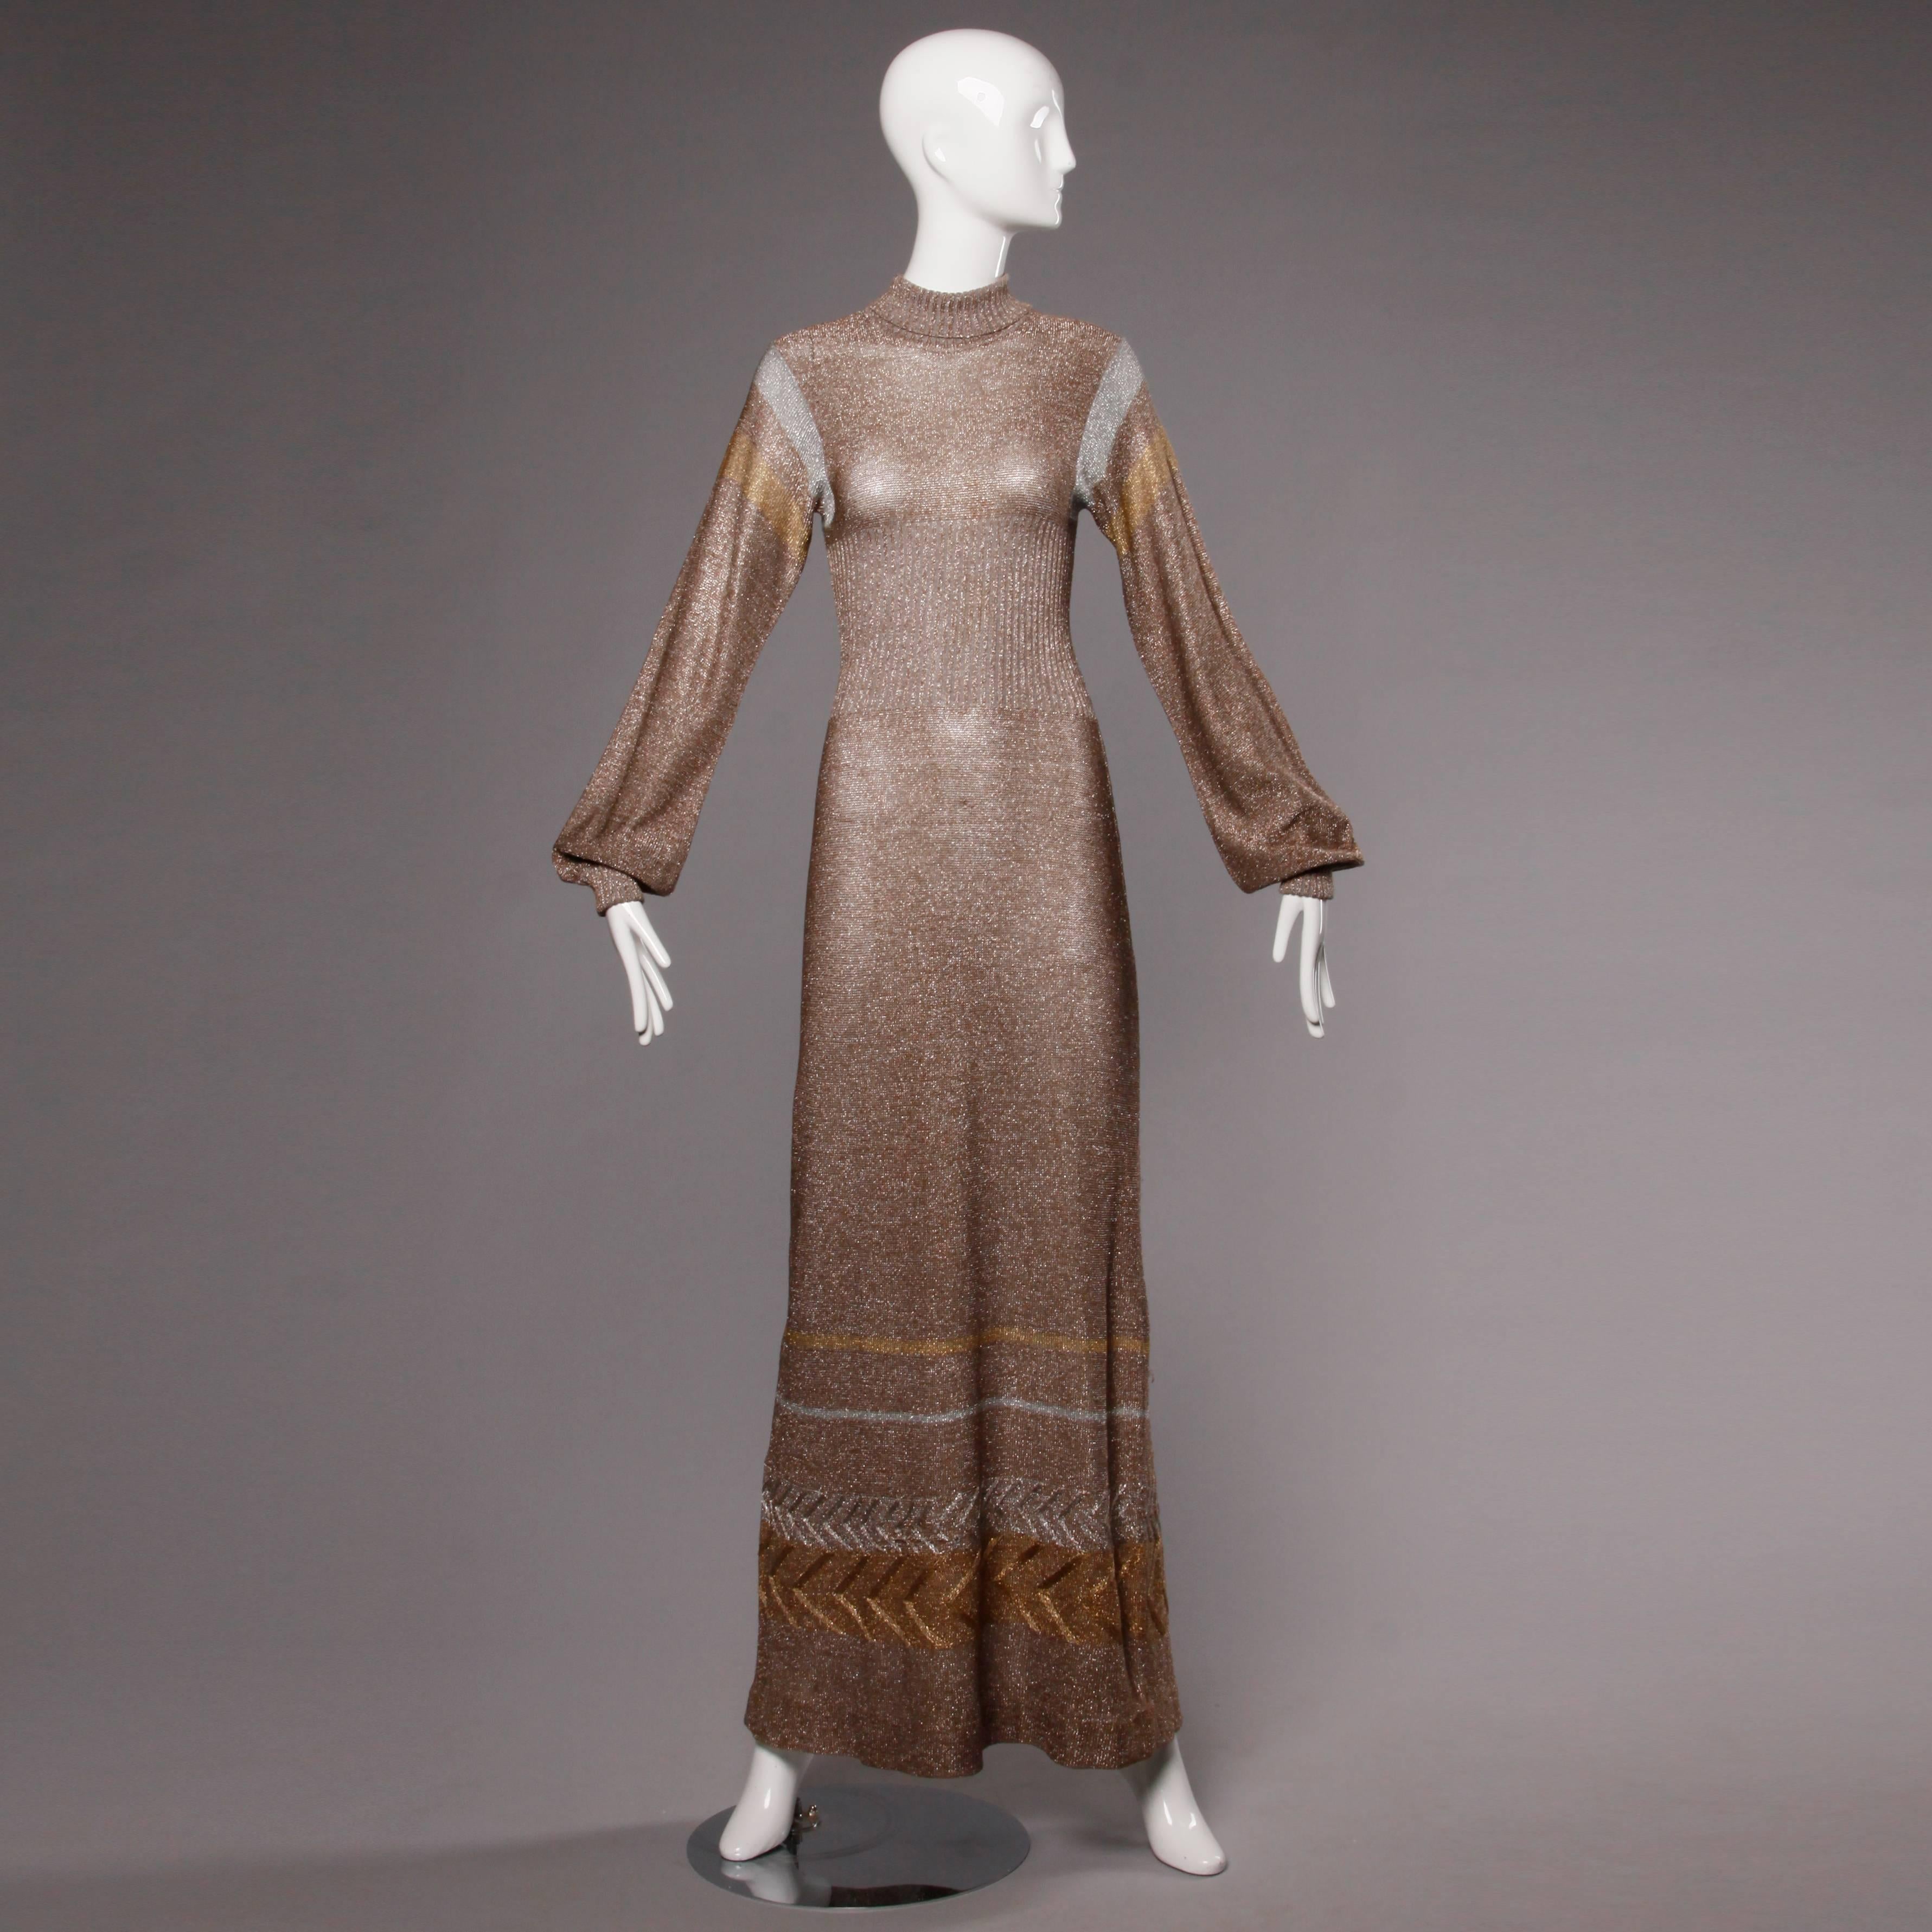 Metallic knit maxi dress with long sleeves by Wenjilli. Unlined. Rear zip closure. Marked size 9/10. Estimated size small-medium. 66% acrylic, 22% metallic, 12% polyester. The measurements are as follows:

Bust: Up to 34